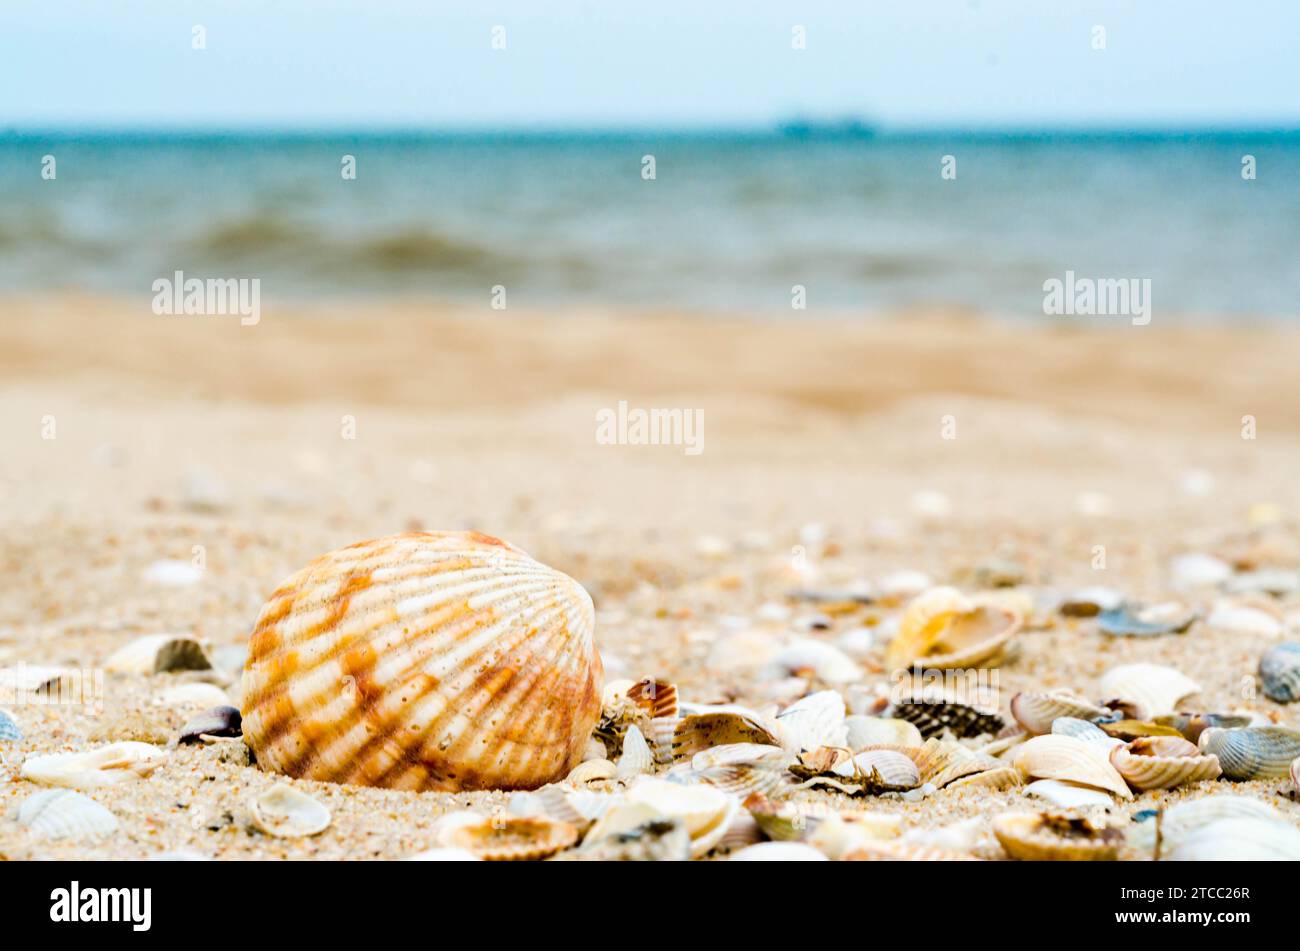 Bright big striped shell with another little different shells in quartz sand against the blue sea and ships silhouette on the horizon Stock Photo